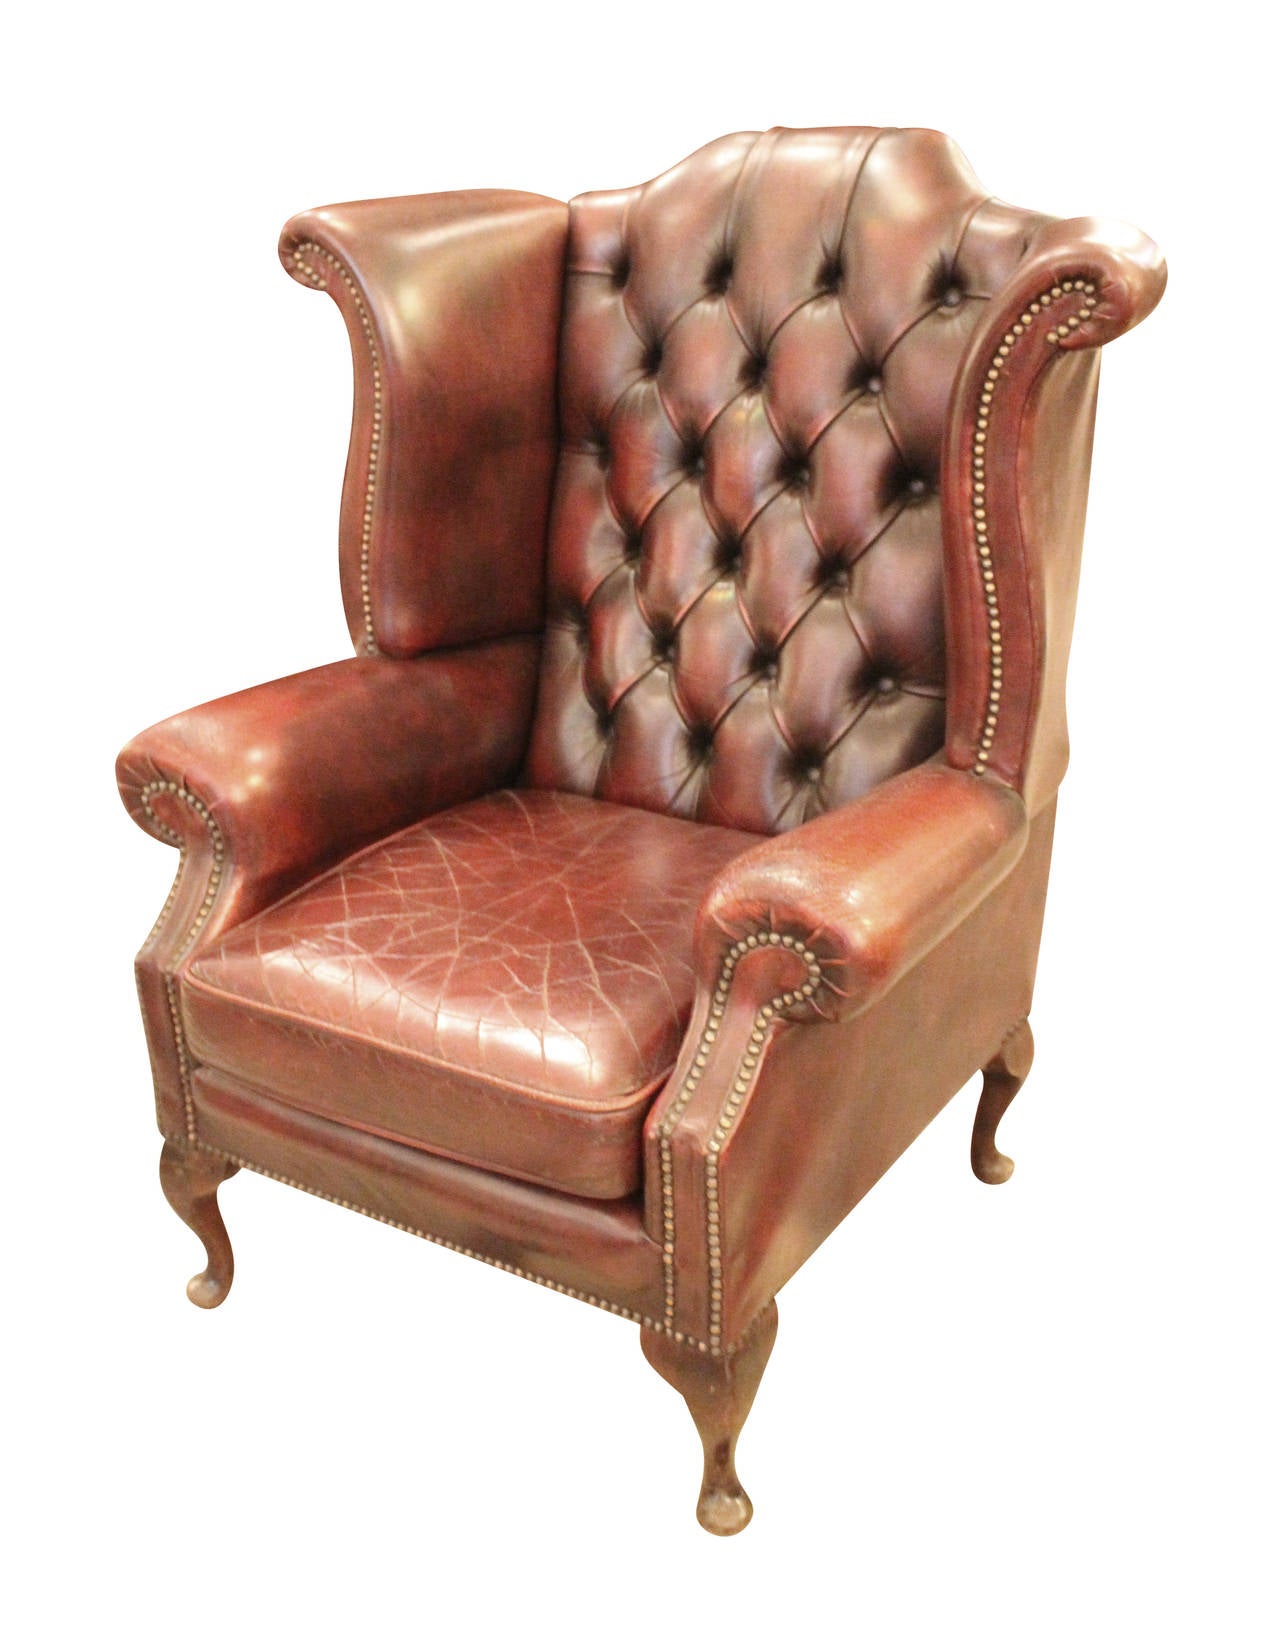 1980s pair of English tufted leather wingback chairs with claw feet. These chairs are in very good condition for their age with only minor cracking in the leather. The leather is a rich dark red color and is rivets with brass rivets around the arms